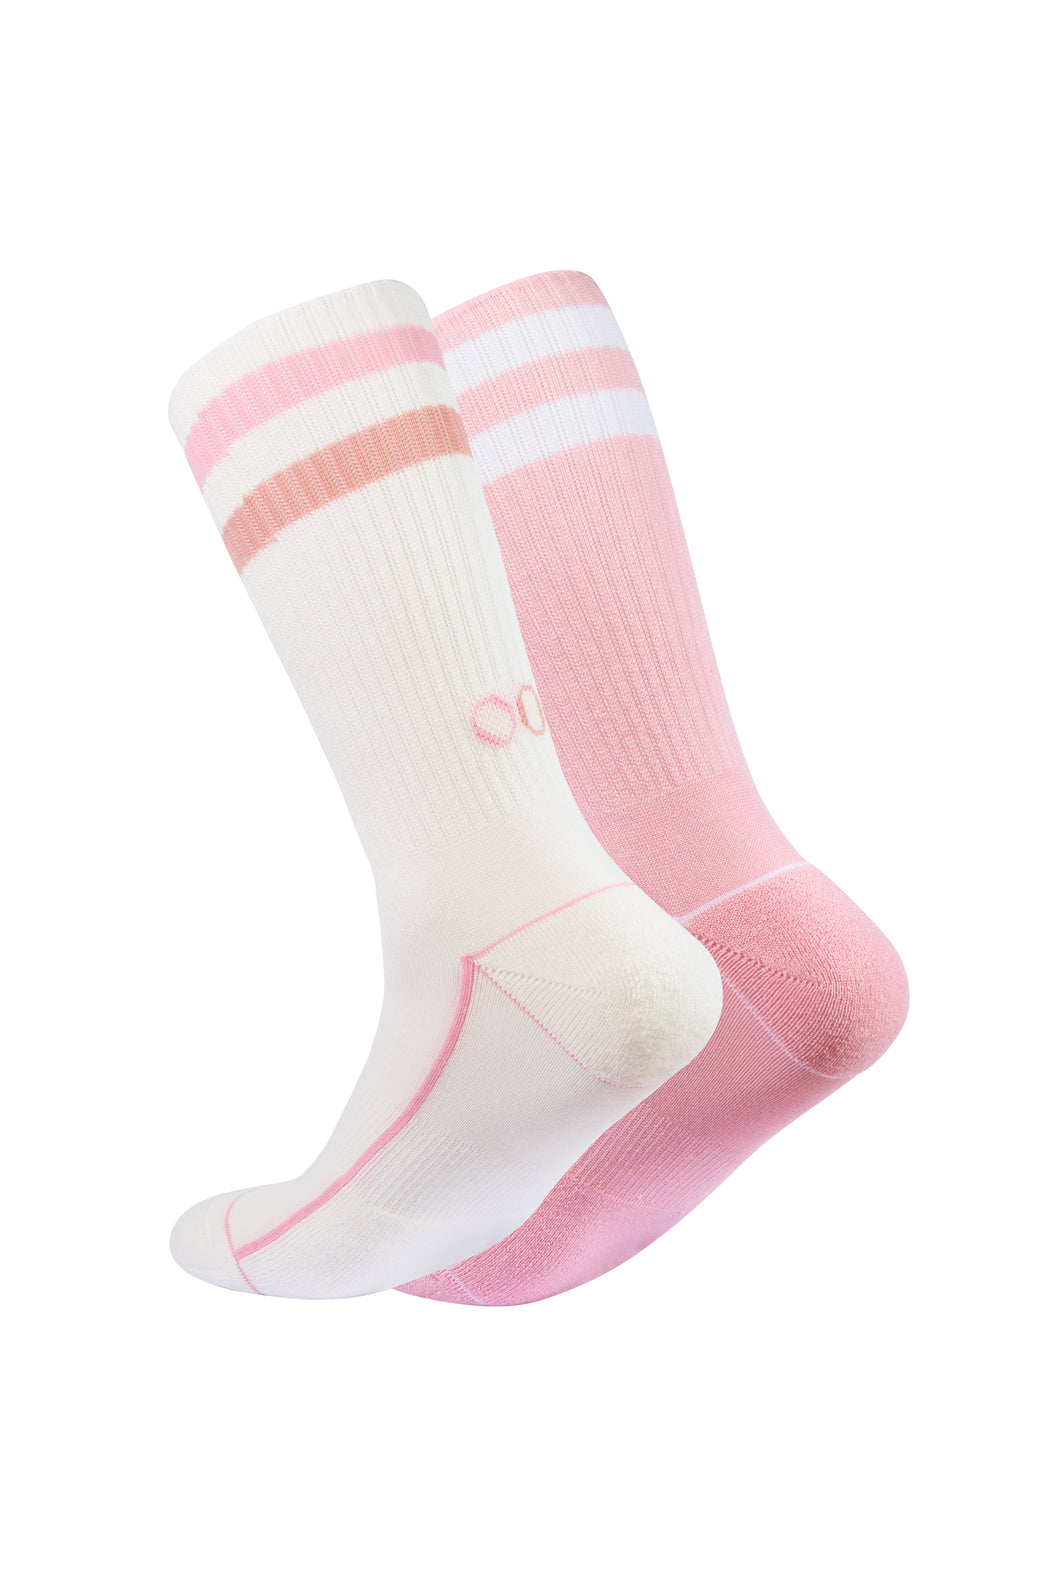 OOLEY Socks Casual 2 Pack Rose-White